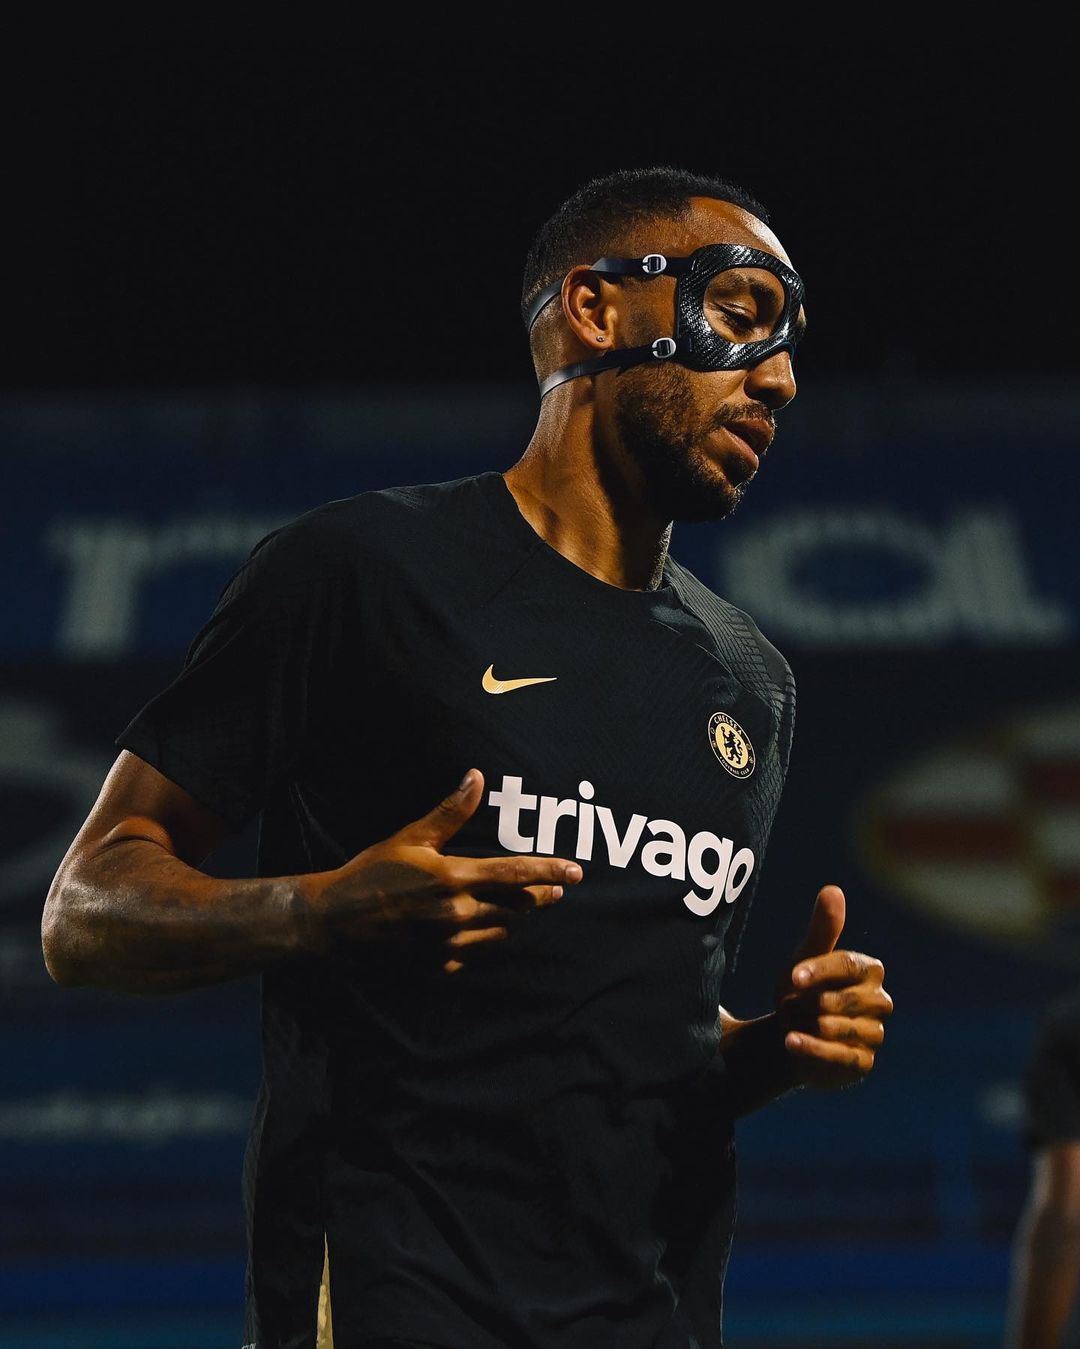 Aubameyang to make Chelsea debut with mask vs Dinamo Zagreb in Champions League